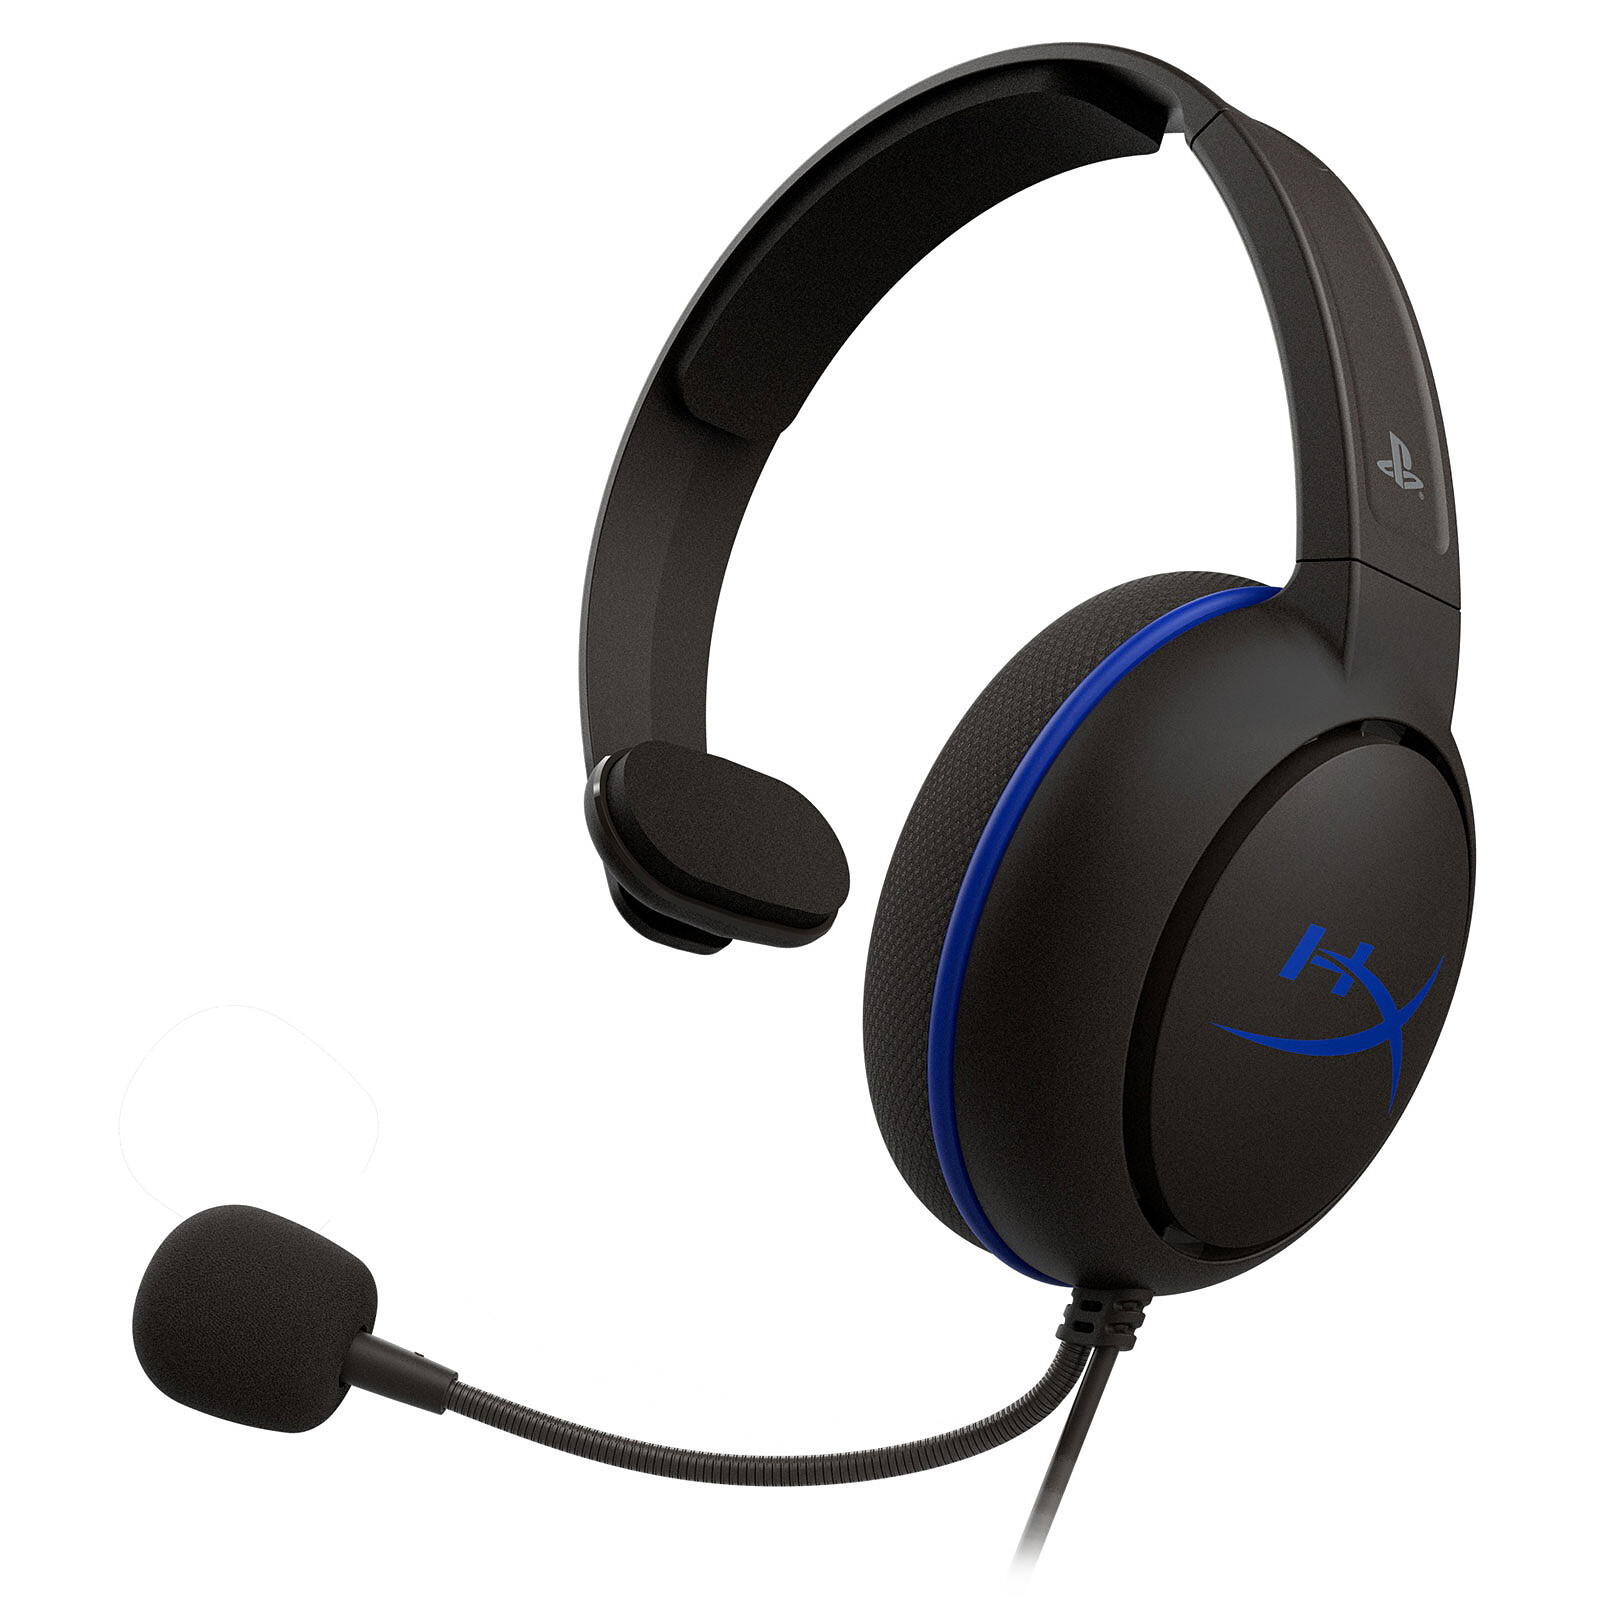 HyperX Cloud Chat (PS4) - PS4 accessories - LDLC 3-year warranty